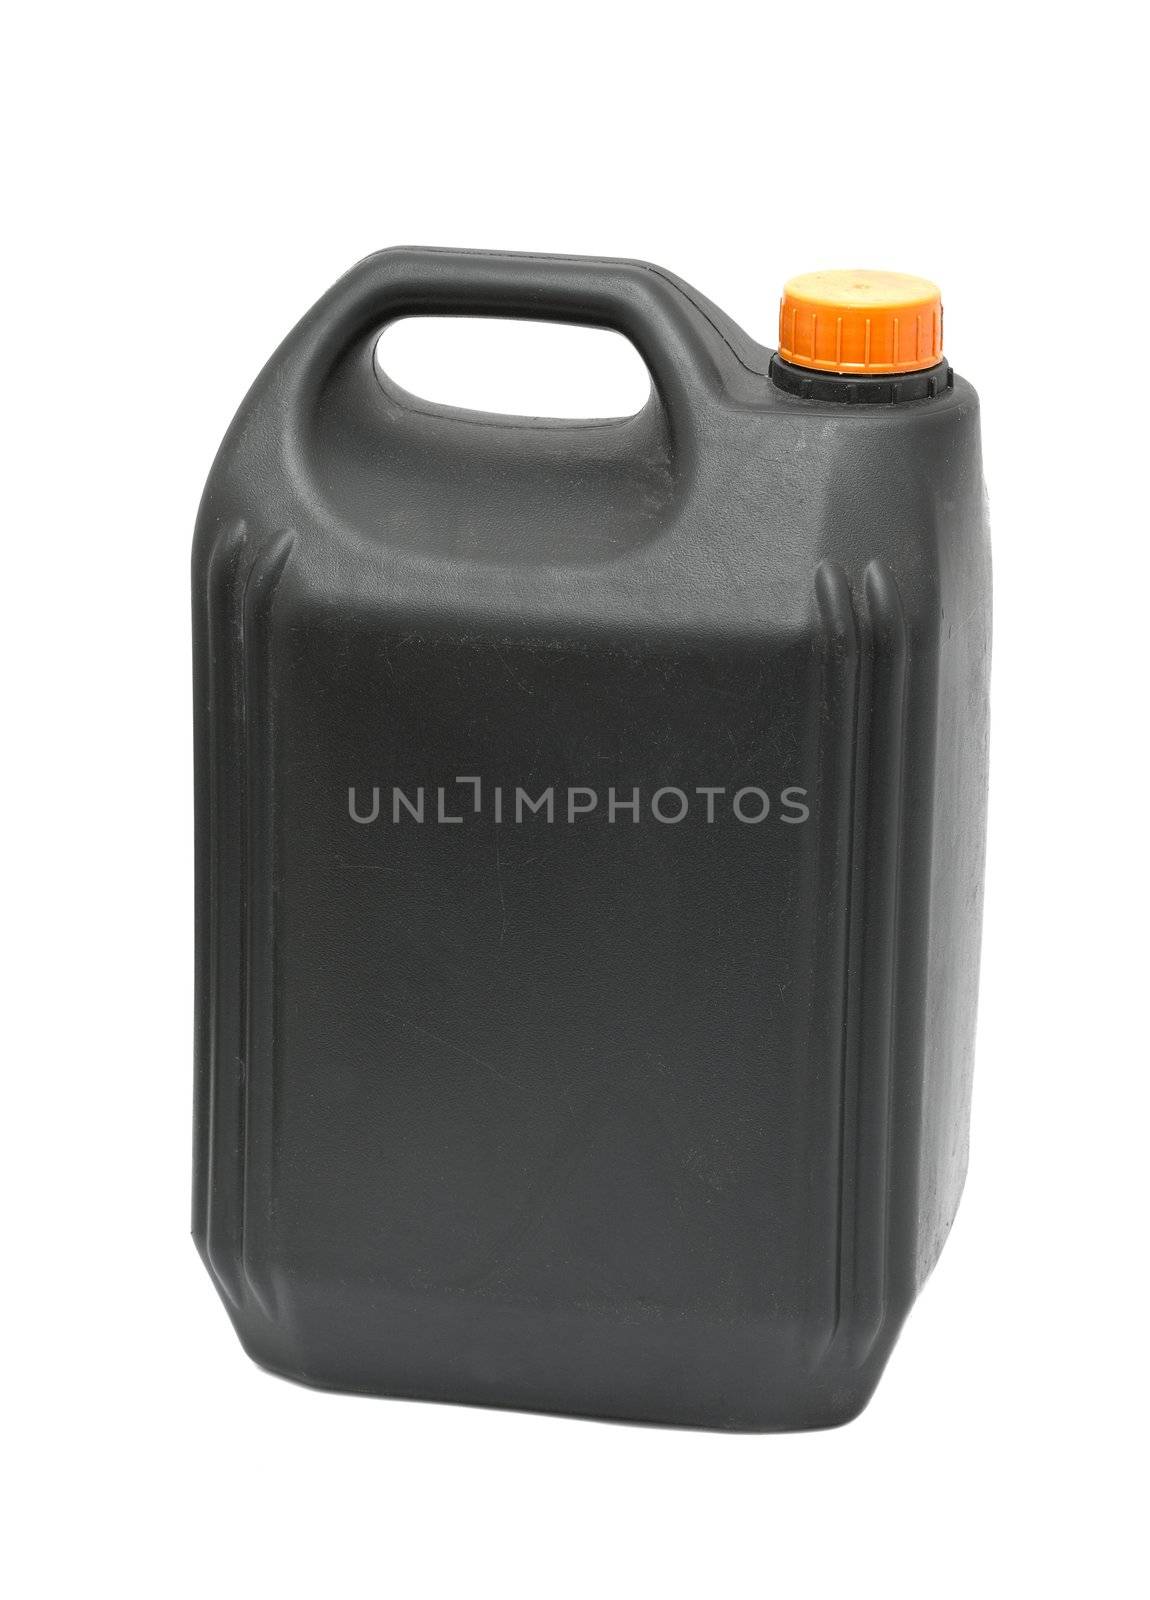 Black plastic can on white background